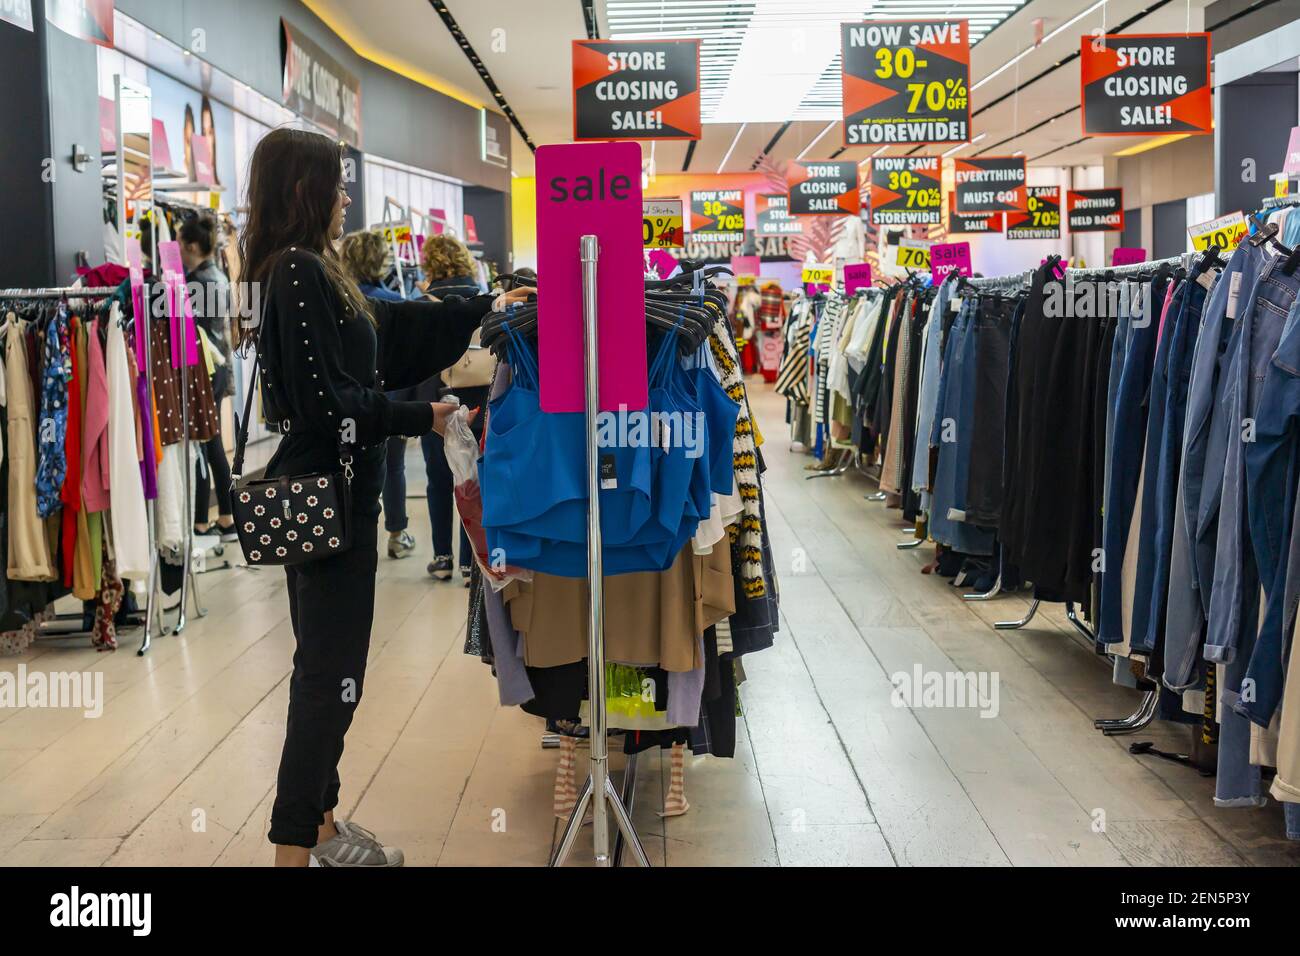 Shoppers browse the sales at the TopShop/TopMan store on Fifth Avenue in  New York on Thursday, June 13, 2019. The Arcadia Group, the owner of the  TopShop chain, announced that it will